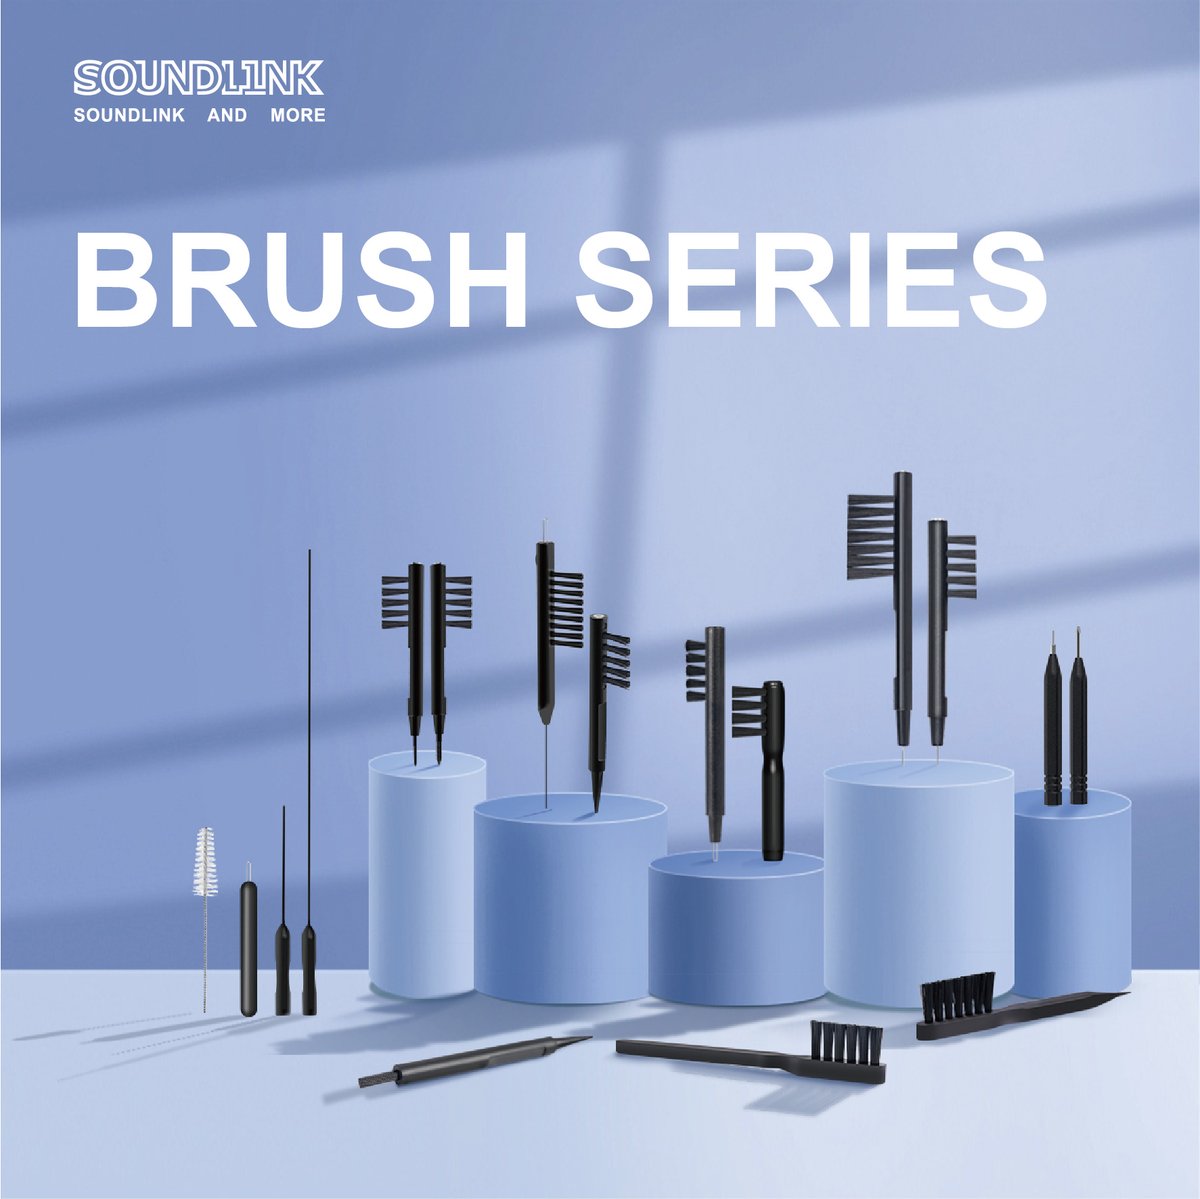 Brush series

👍Various types of brush to clean your hearing aids and earmoulds

👍With magnet to take out battery easily

👍High quality with nylon bristle 

👍With screwdriver for precise regulation

🌐mshop.onloon.net/products/hygie…

#hearingaidmanufacture #hearingaid #ear #earmold